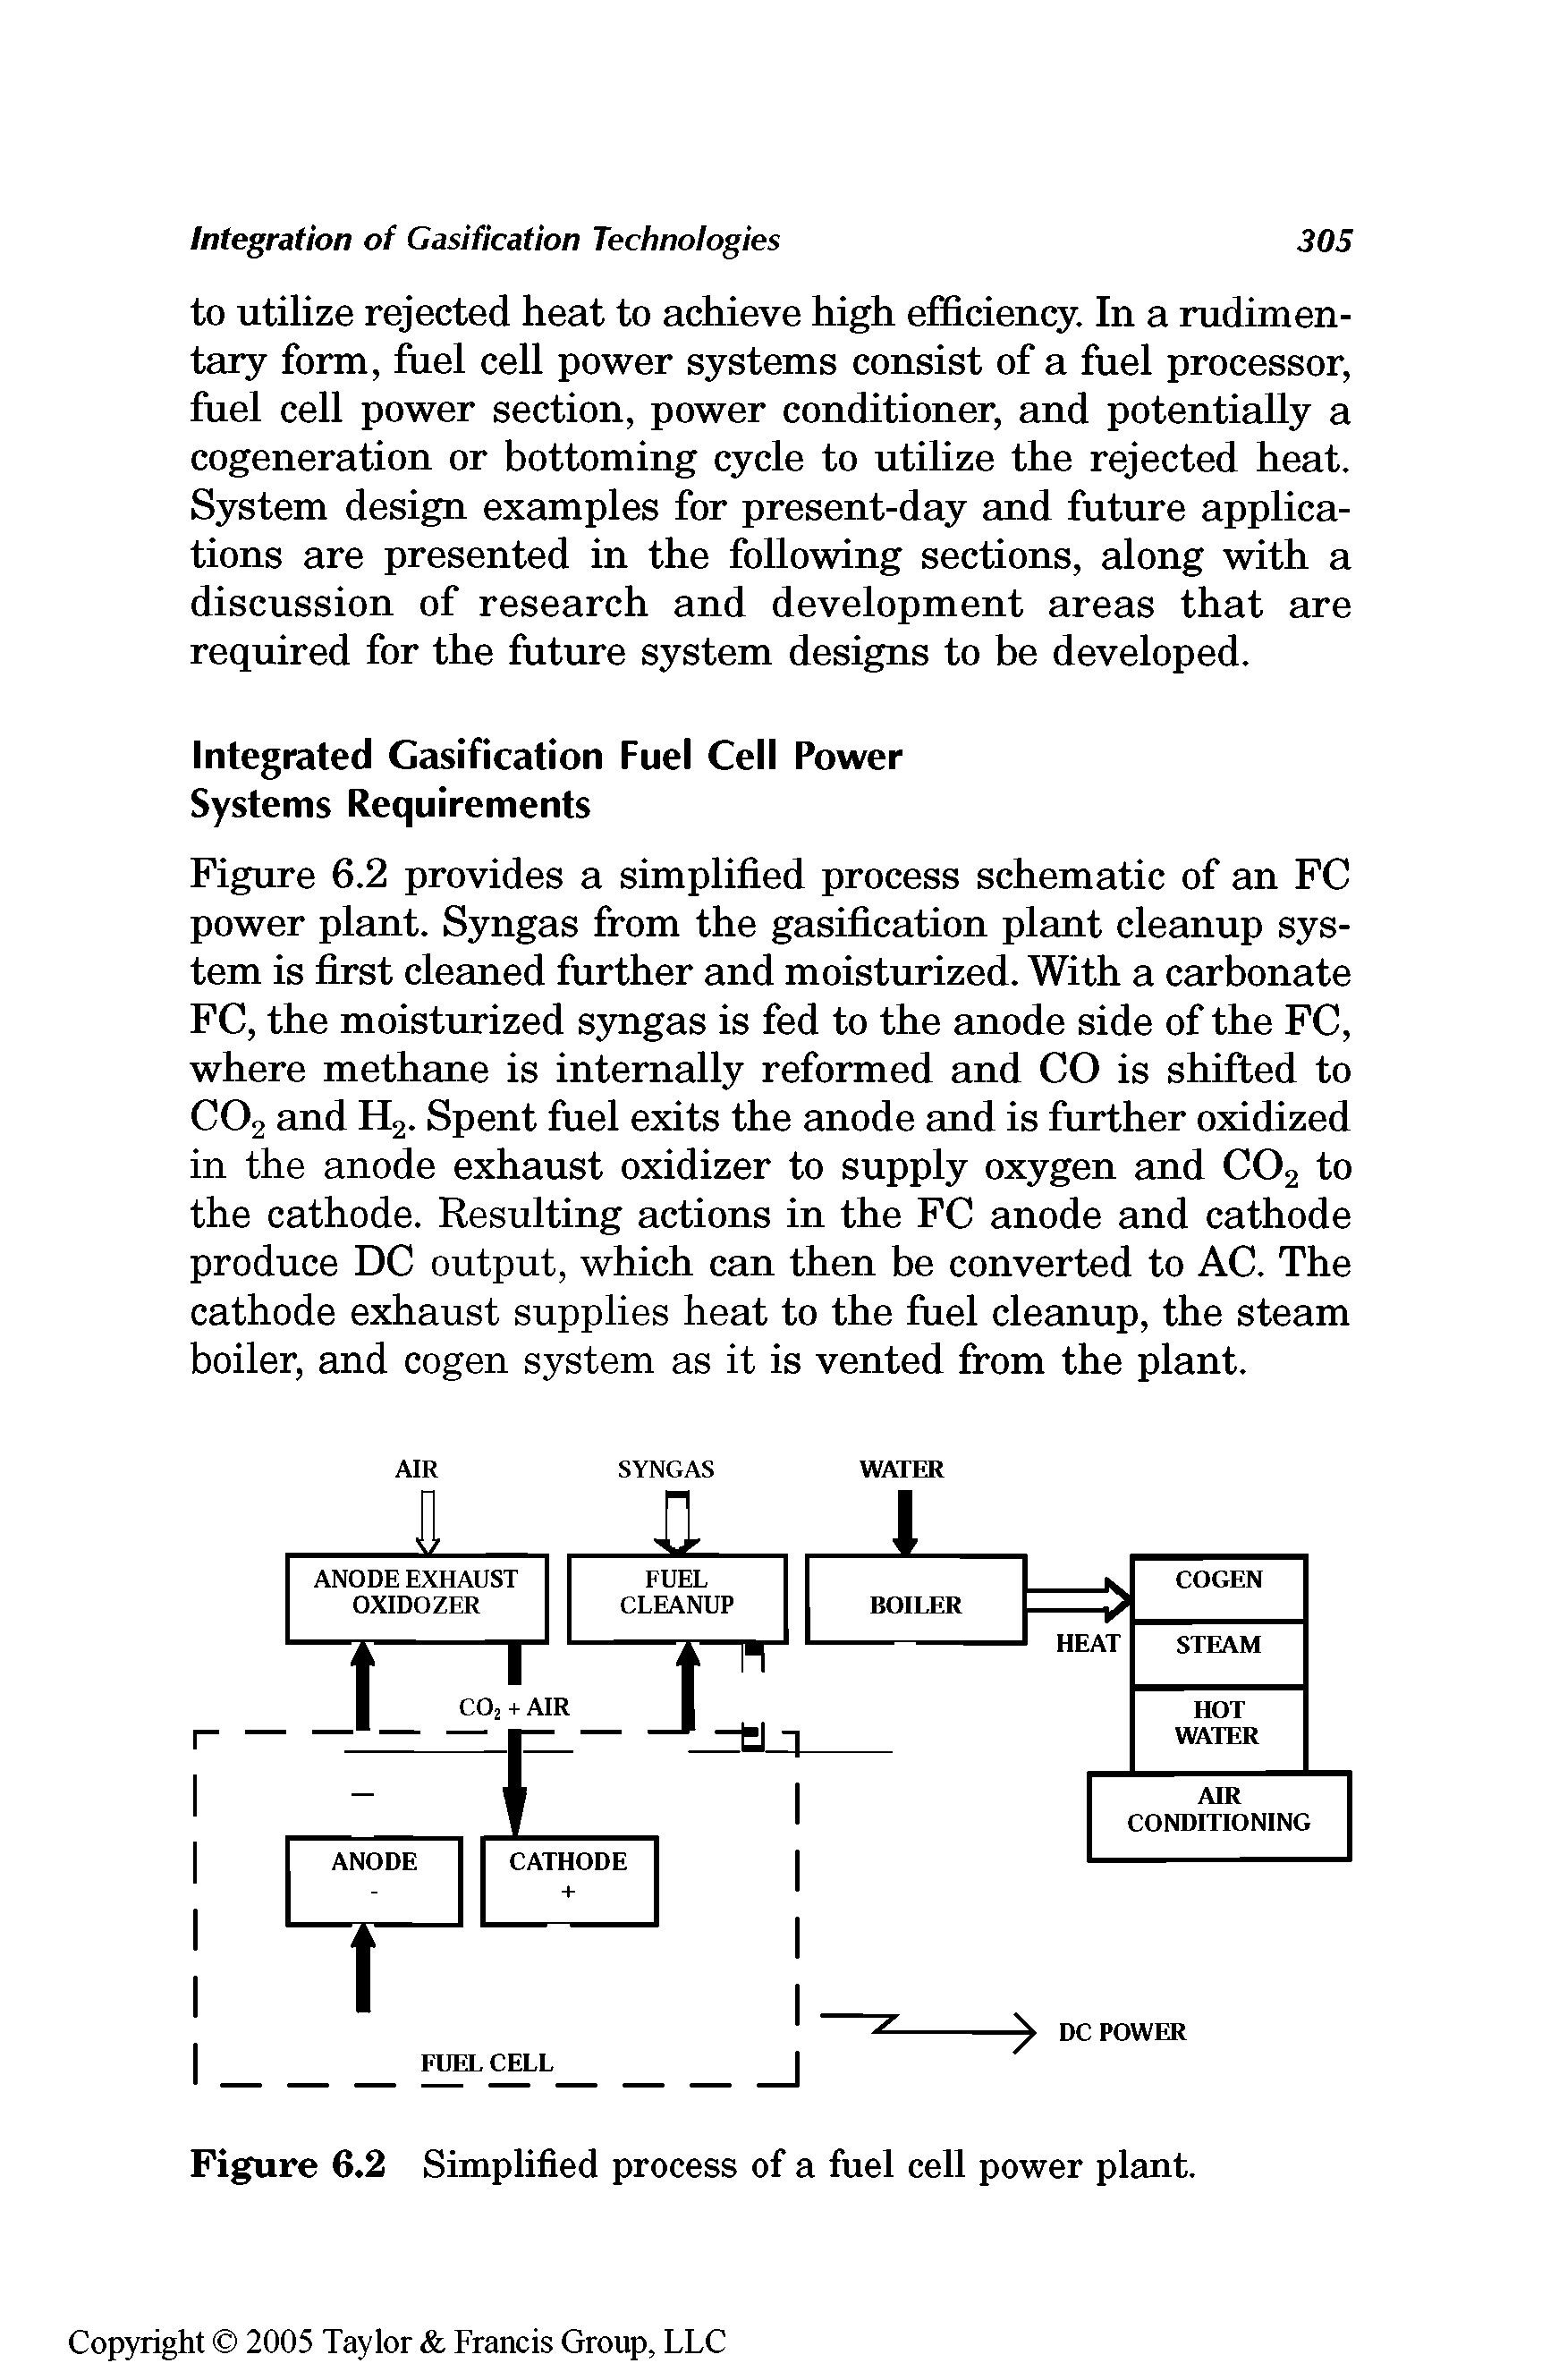 Figure 6.2 Simplified process of a fuel cell power plant.